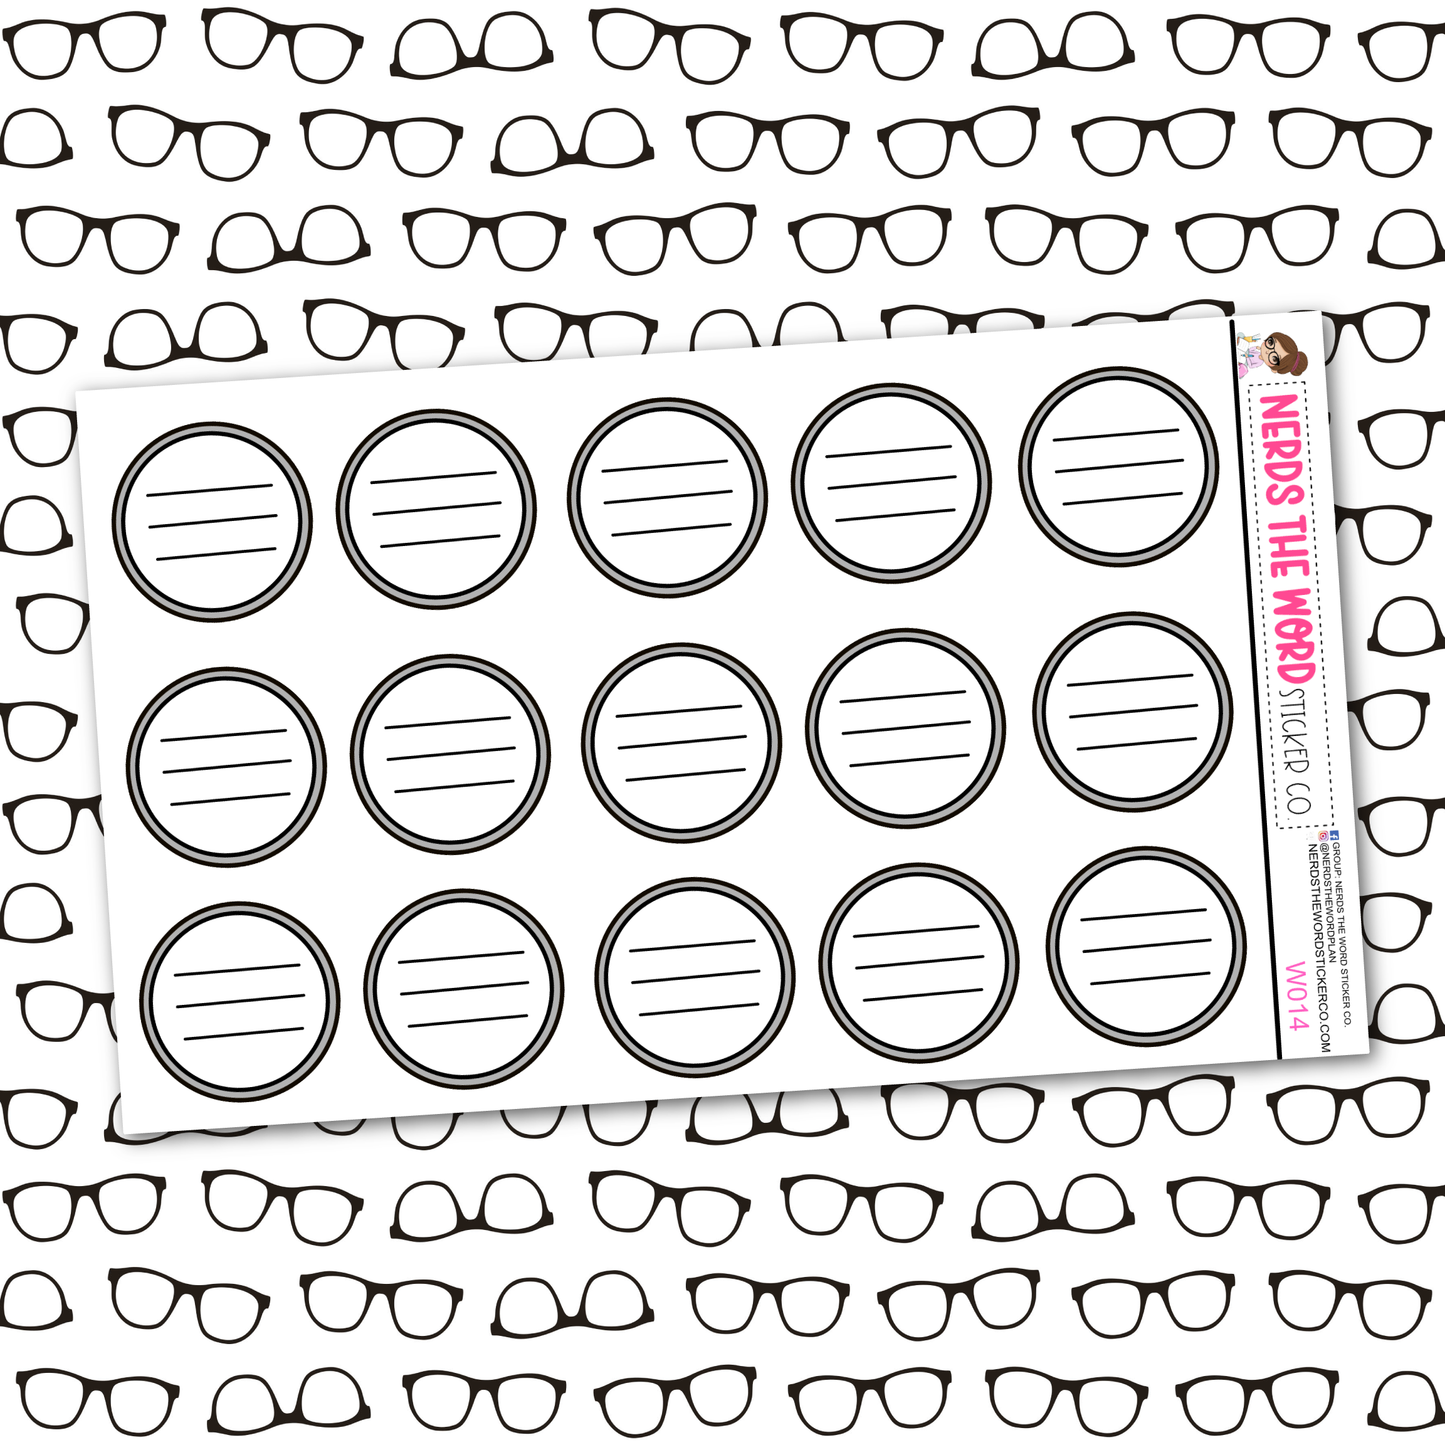 Grayscale Circle Lined Functional Sticker Sheet